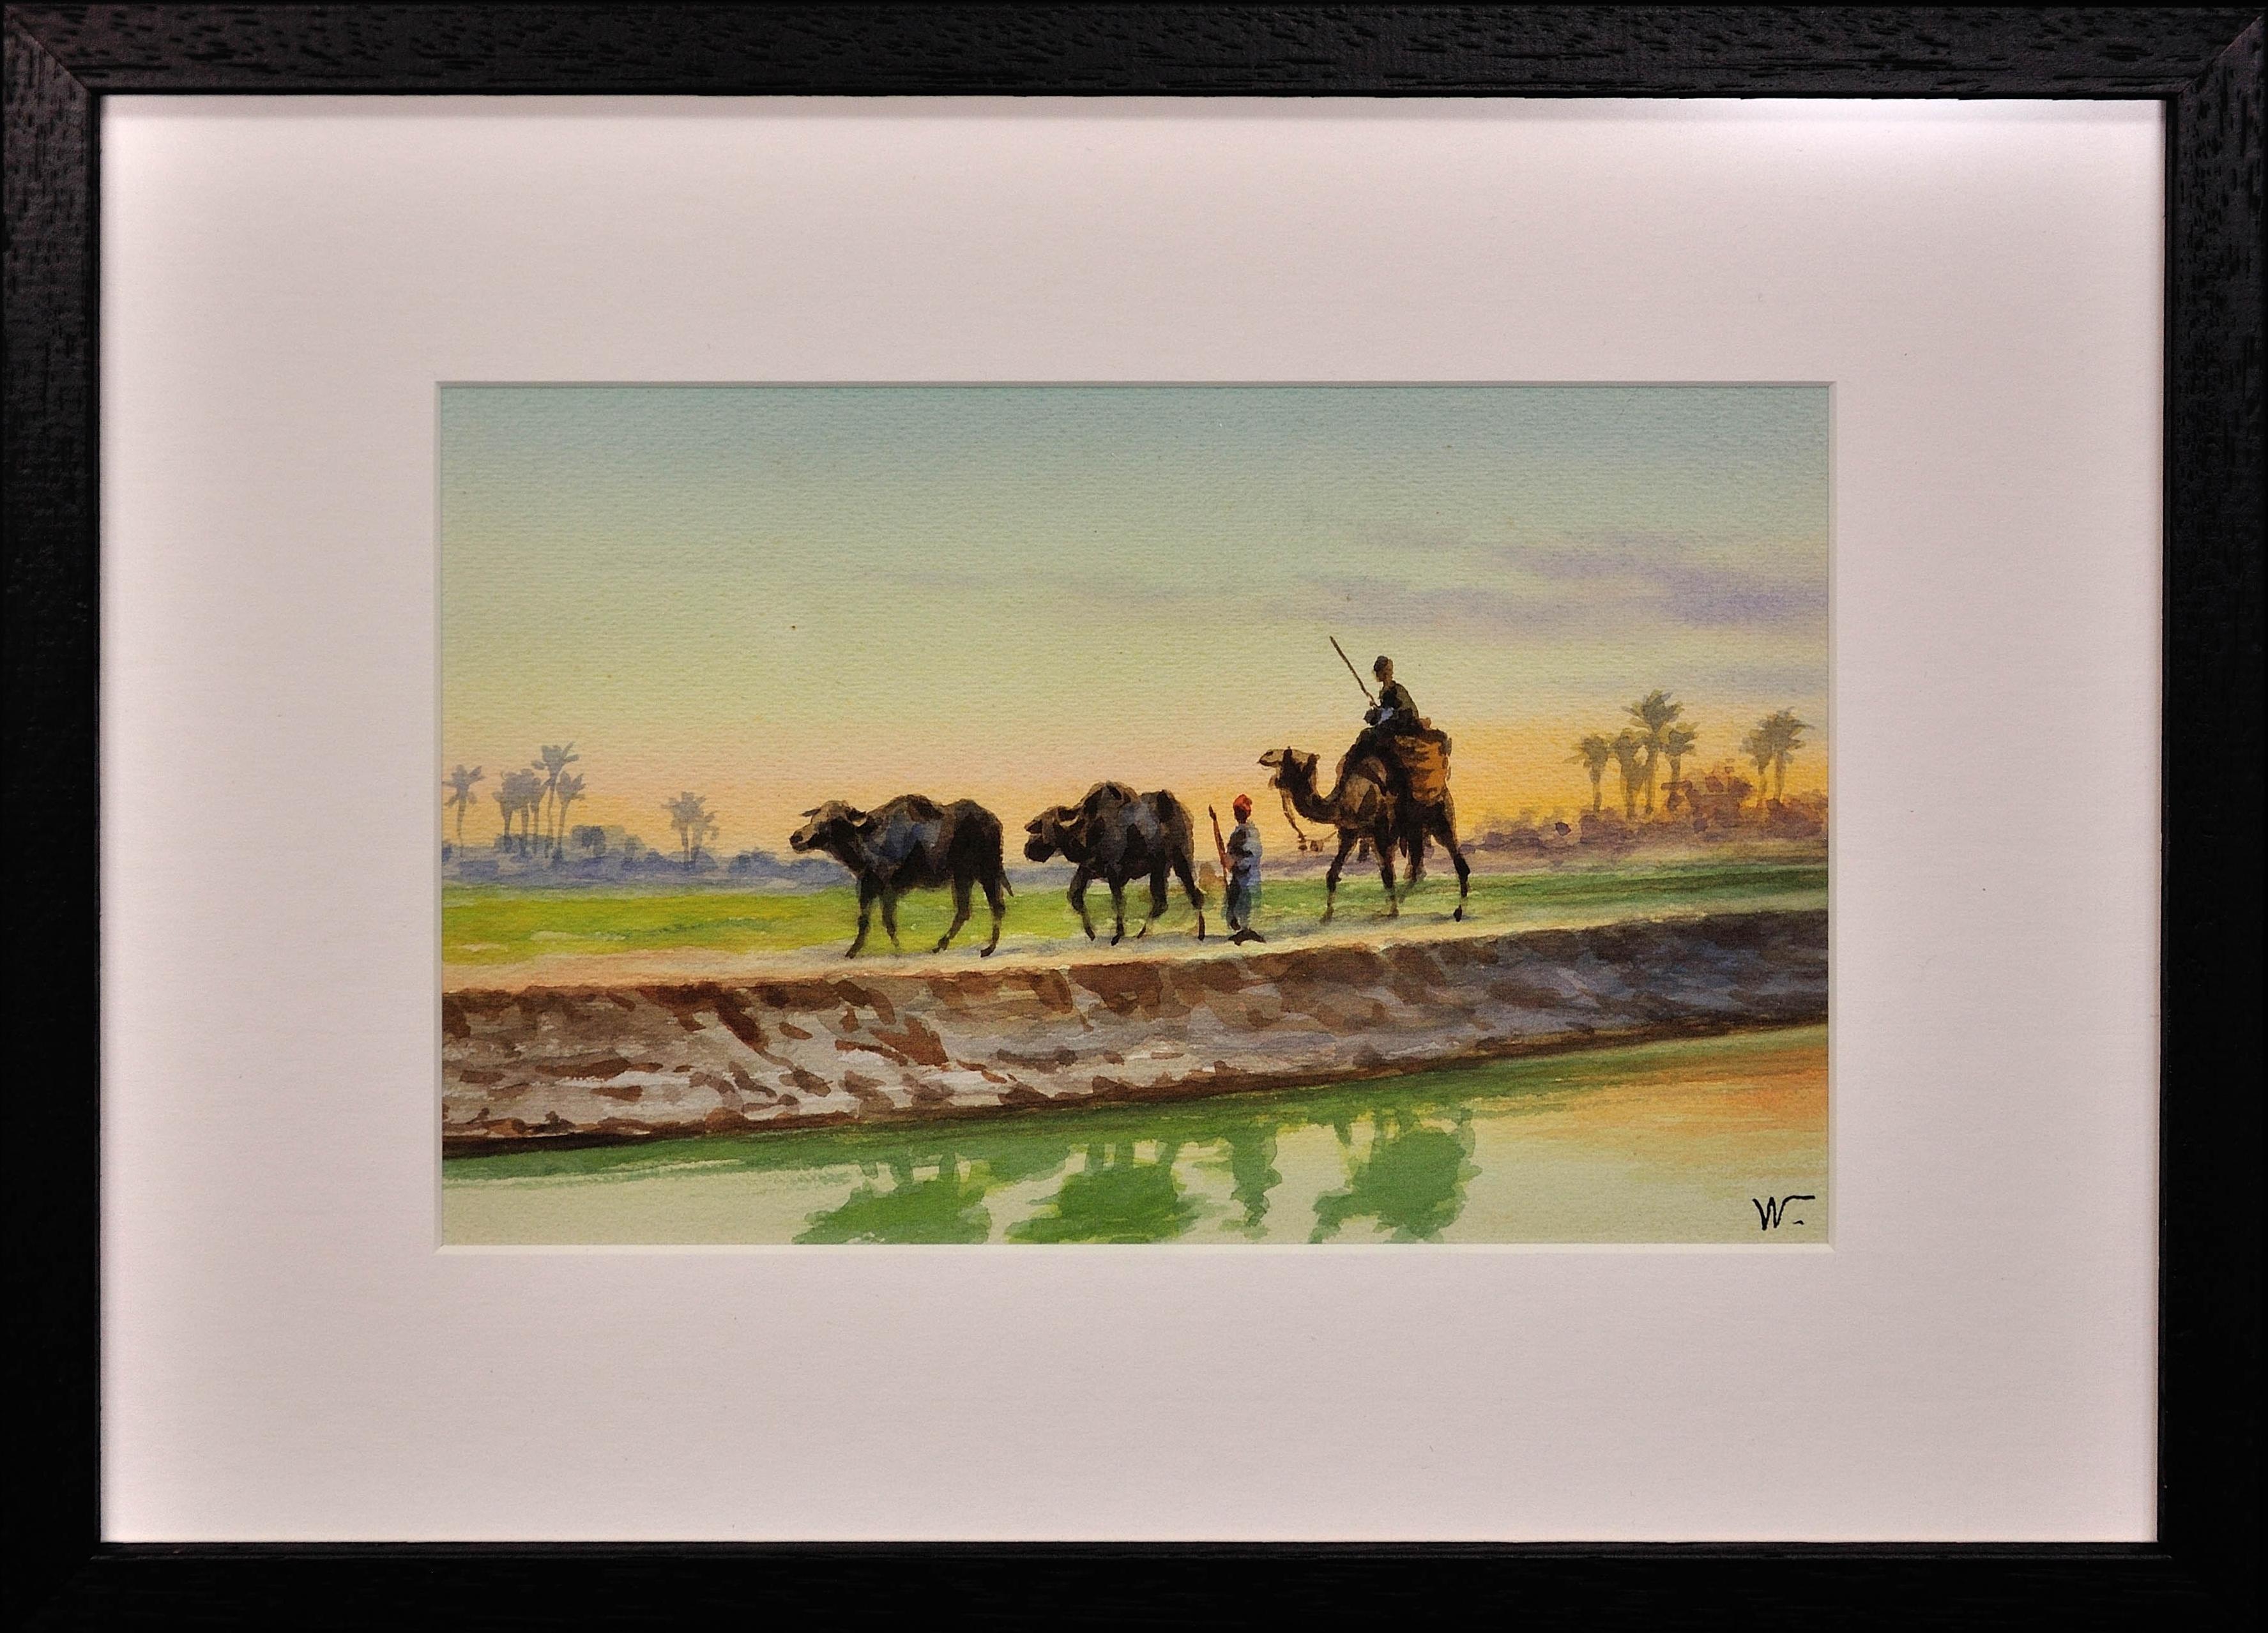 Egyptian Buffalo and Farmers. Camel Rider. Egypt.American Orientalist.Watercolor